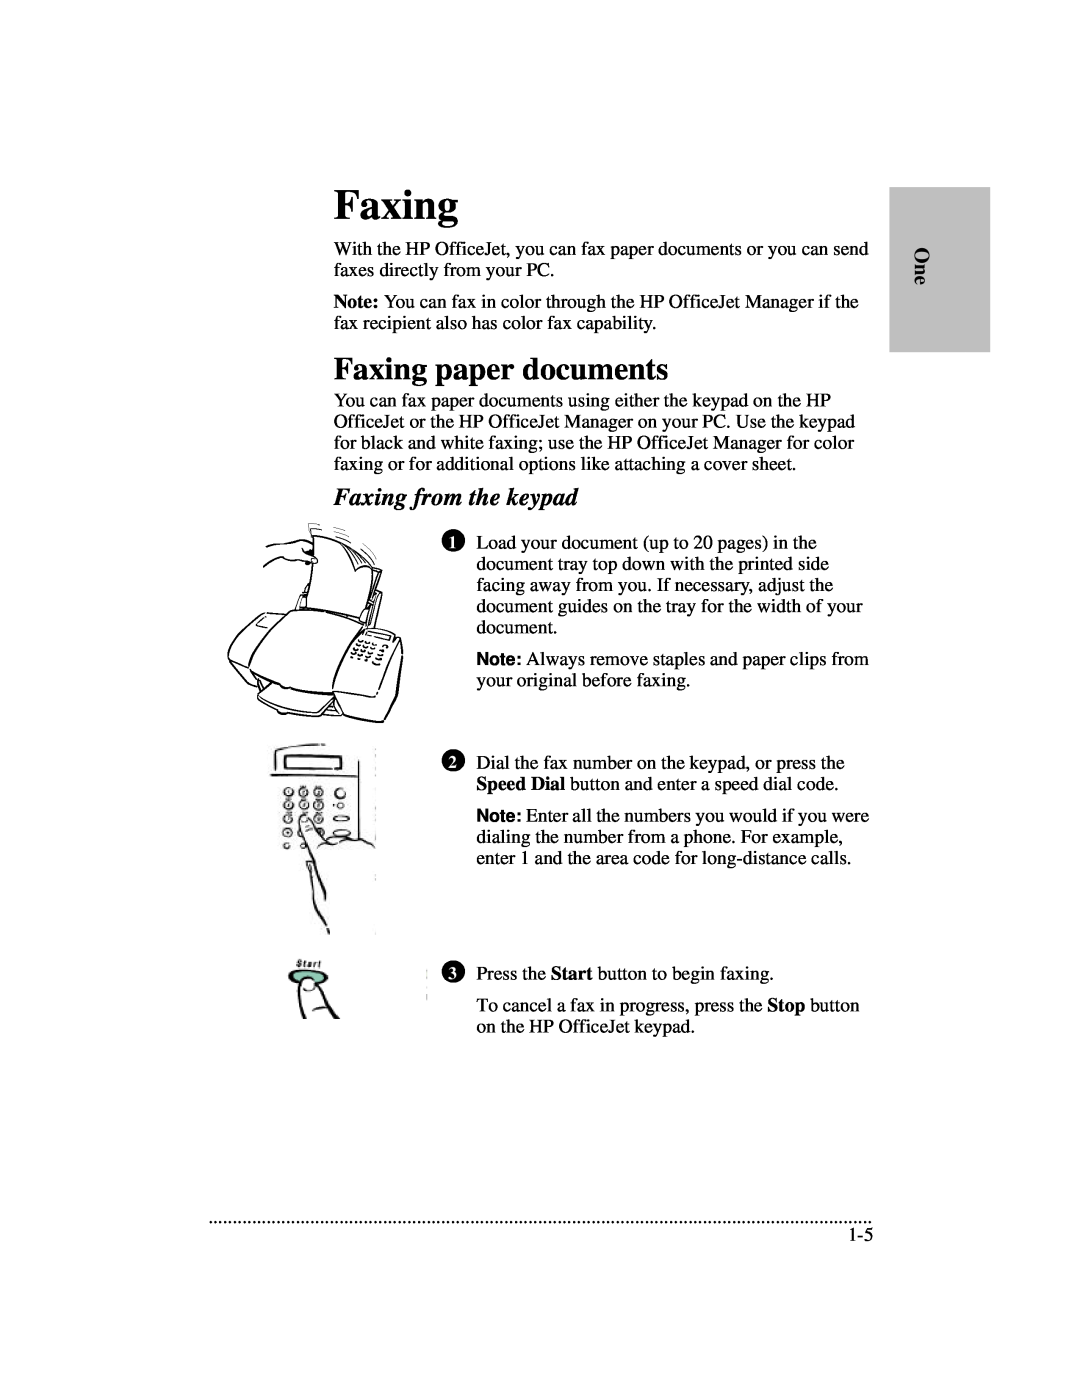 HP 700 manual Faxing paper documents, Faxing from the keypad 